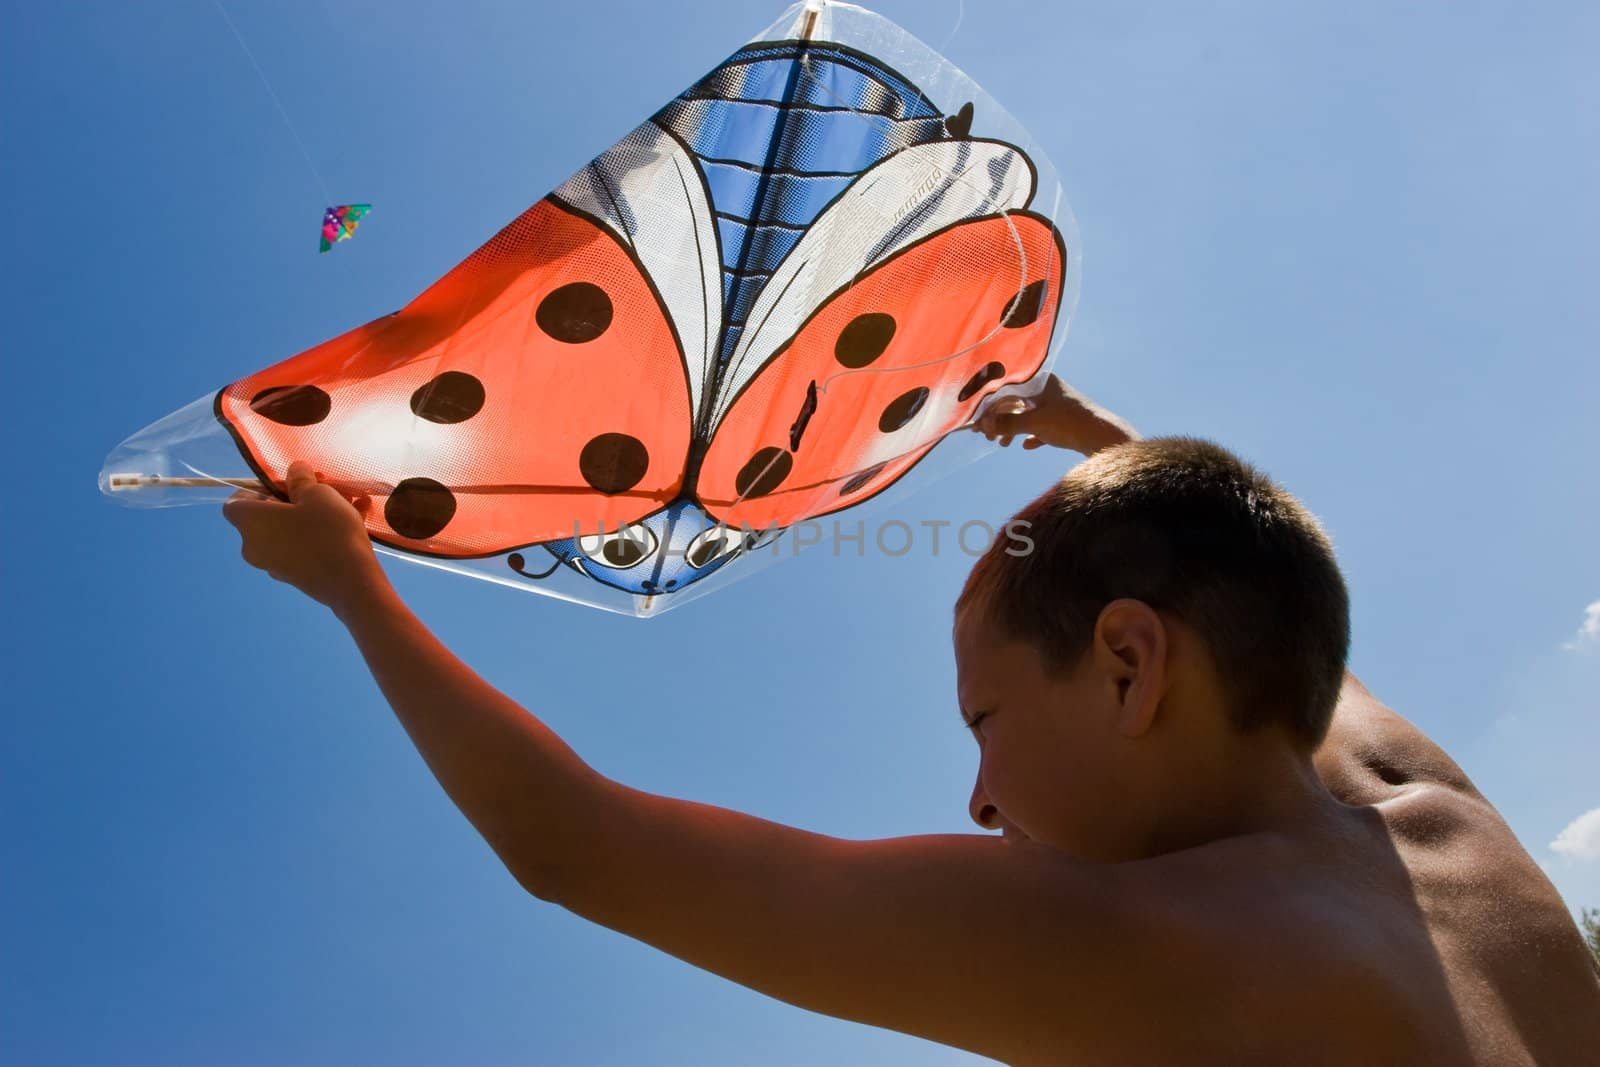 vacation, portrait of summer boy with kite